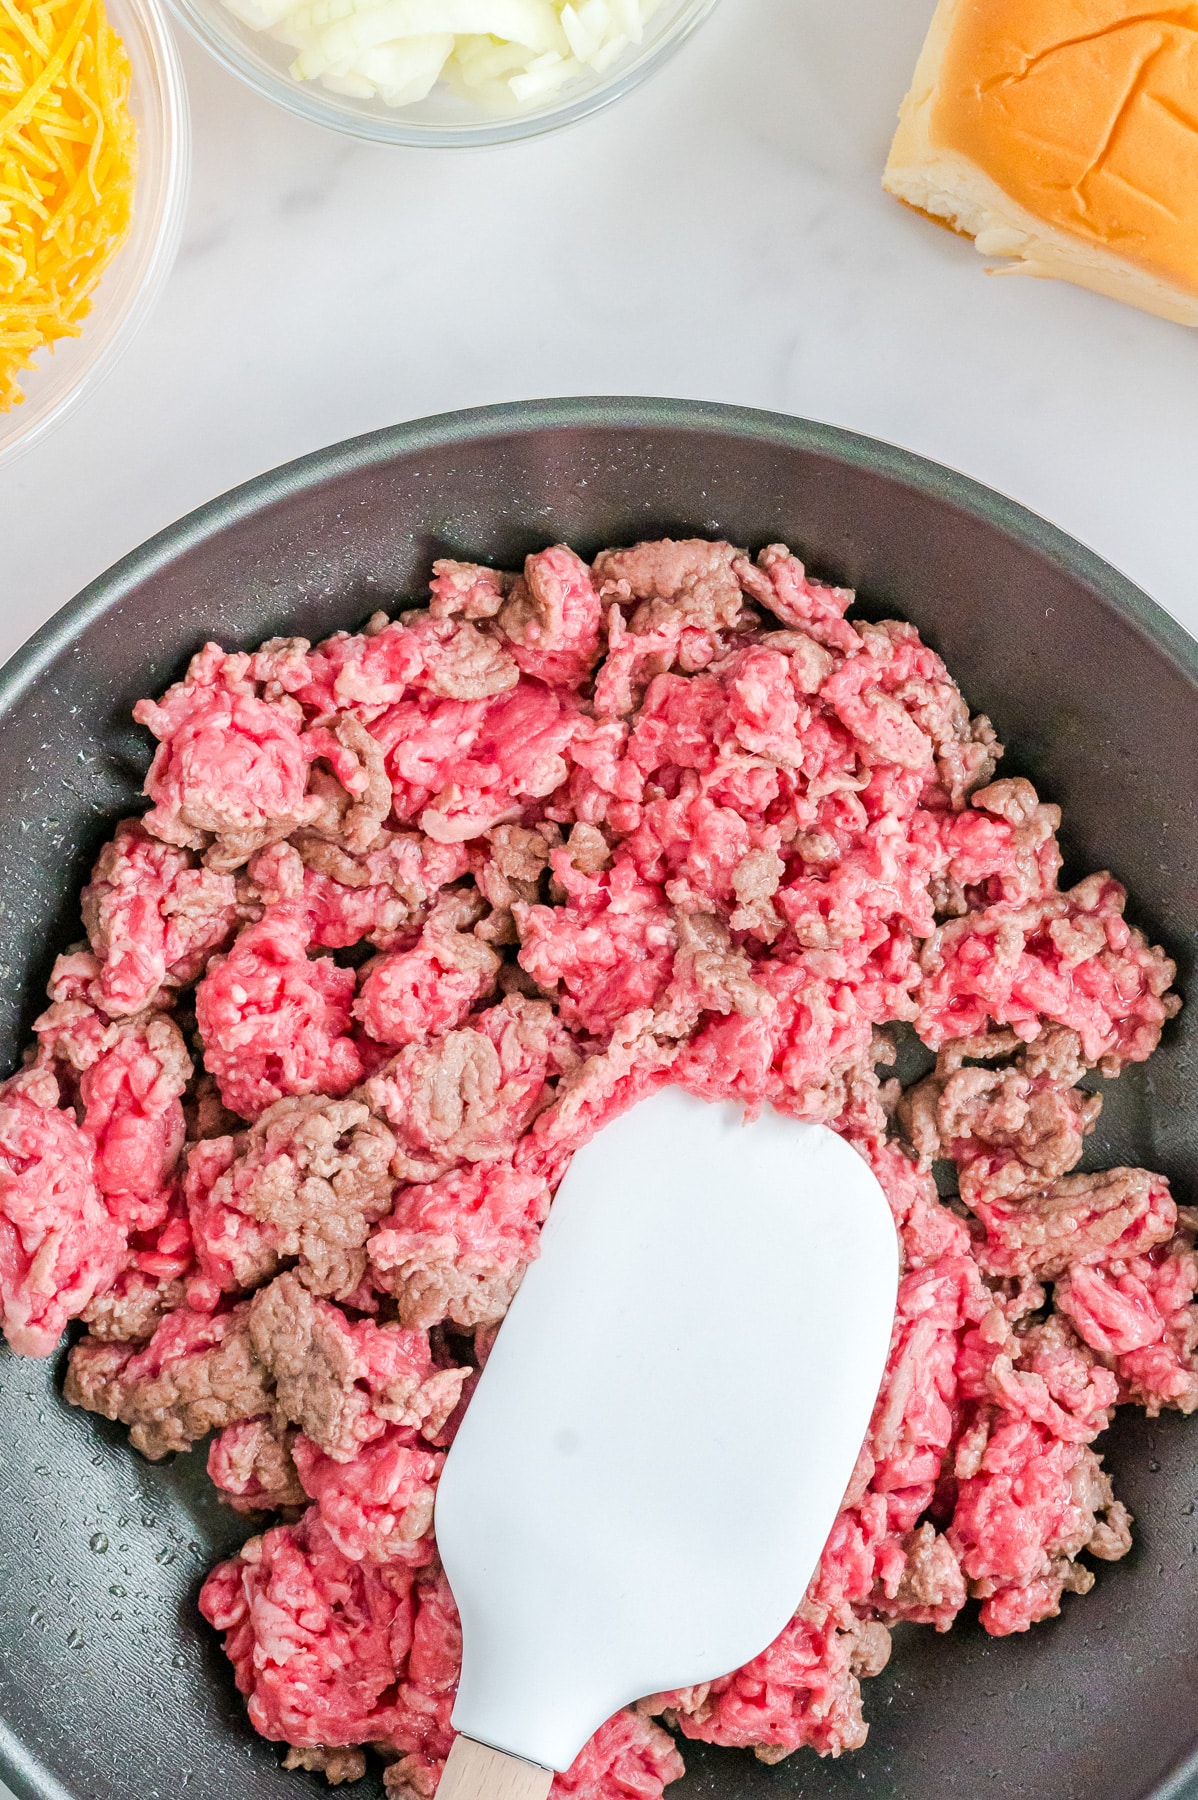 A frying pan with ground beef in the process of being cooked, with some pink and some brown.